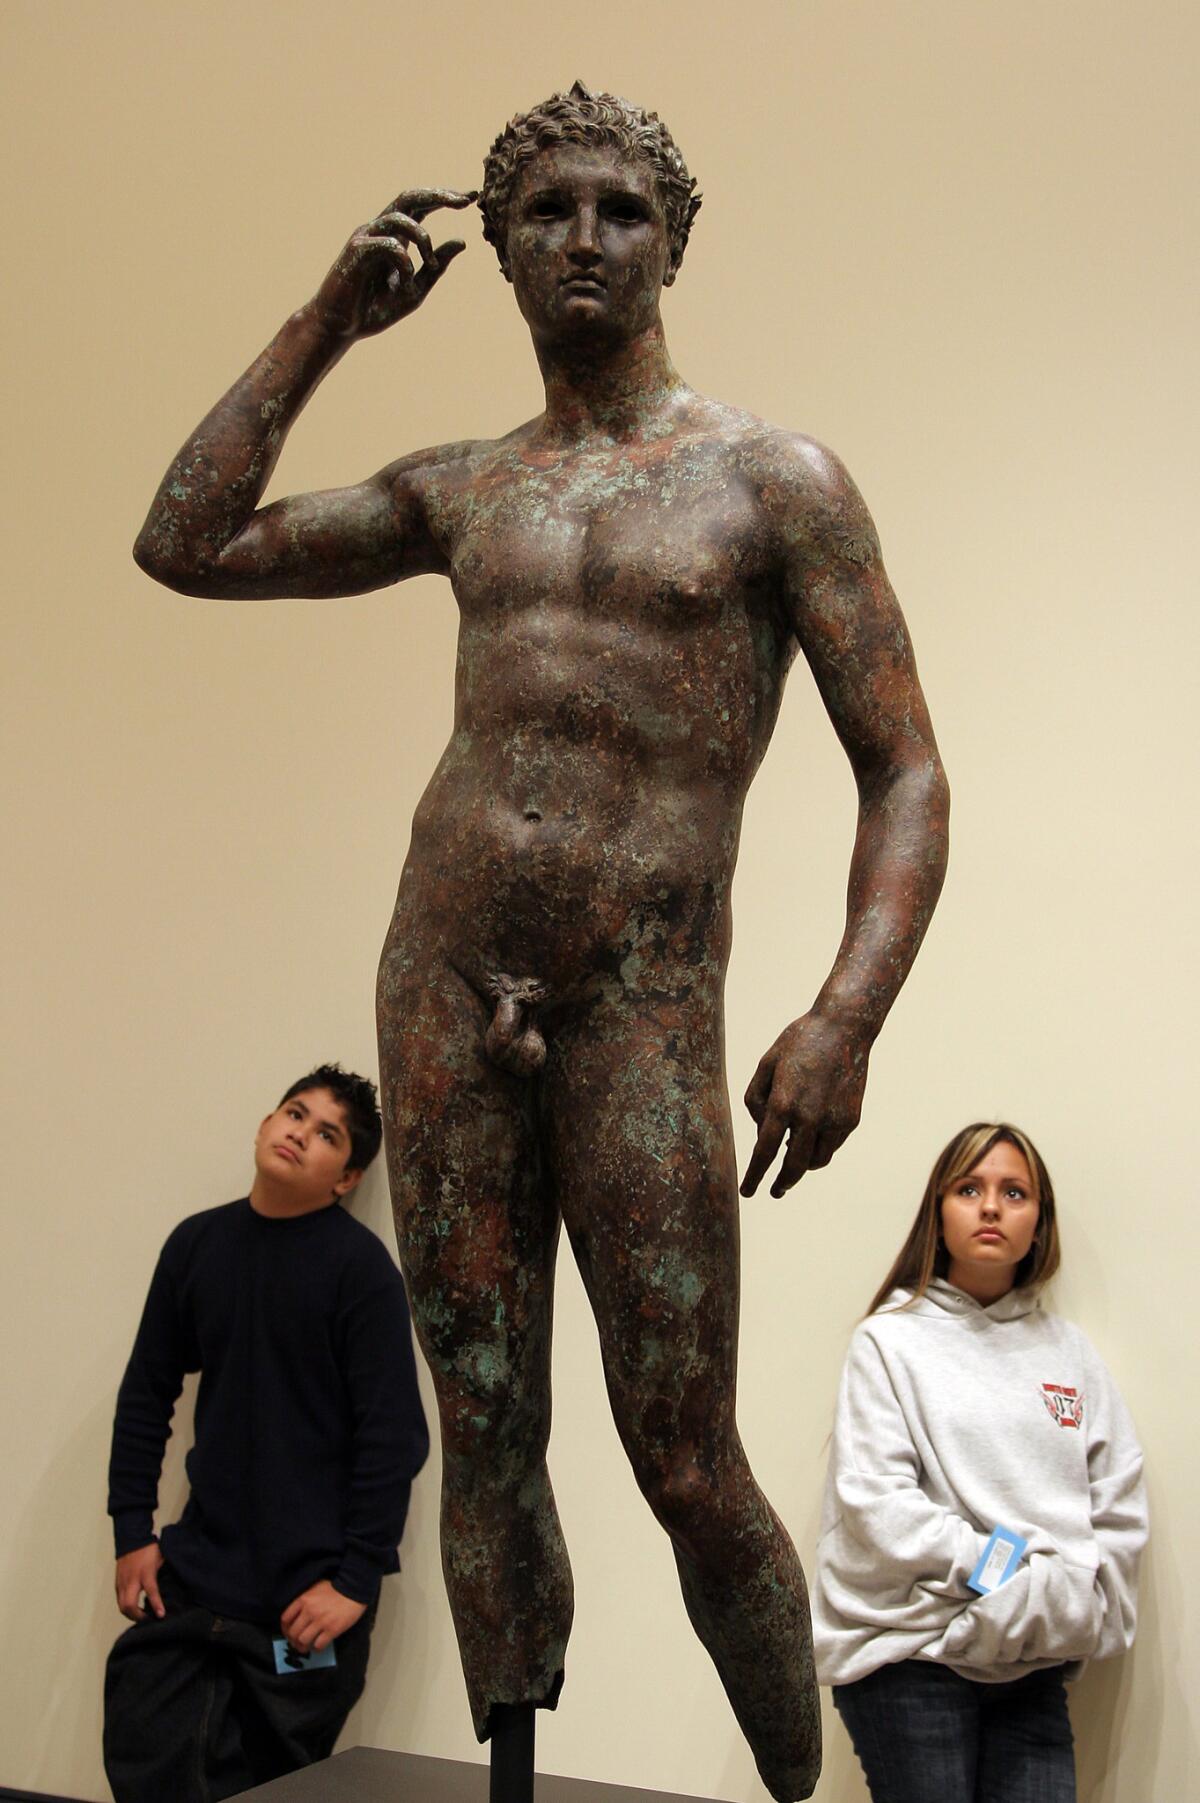 Visitors look at the "Victorious Youth" bronze at the Getty Villa in Pacific Palisades.